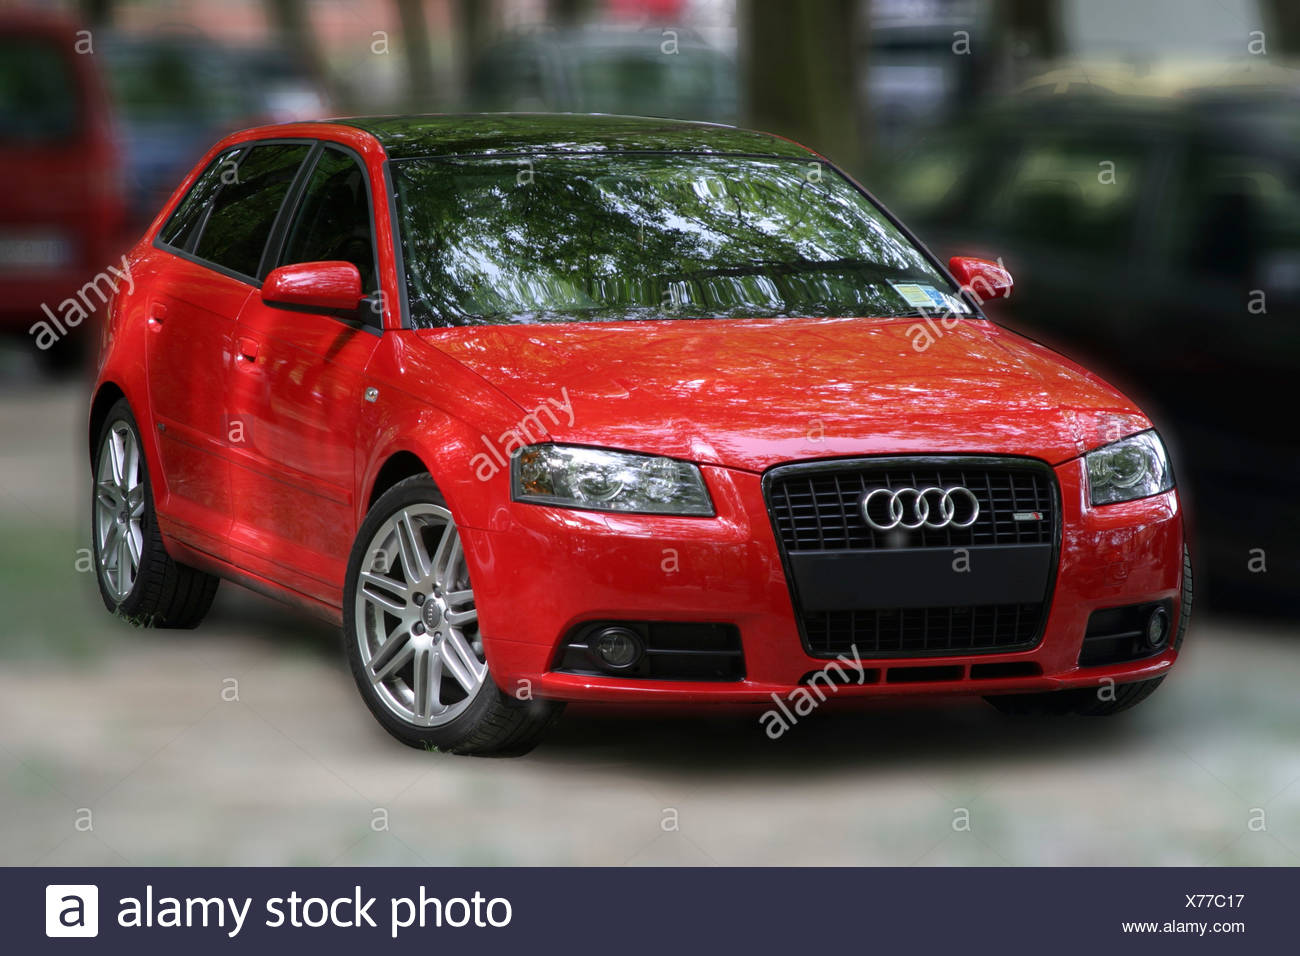 Red Audi High Resolution Stock Photography And Images Alamy